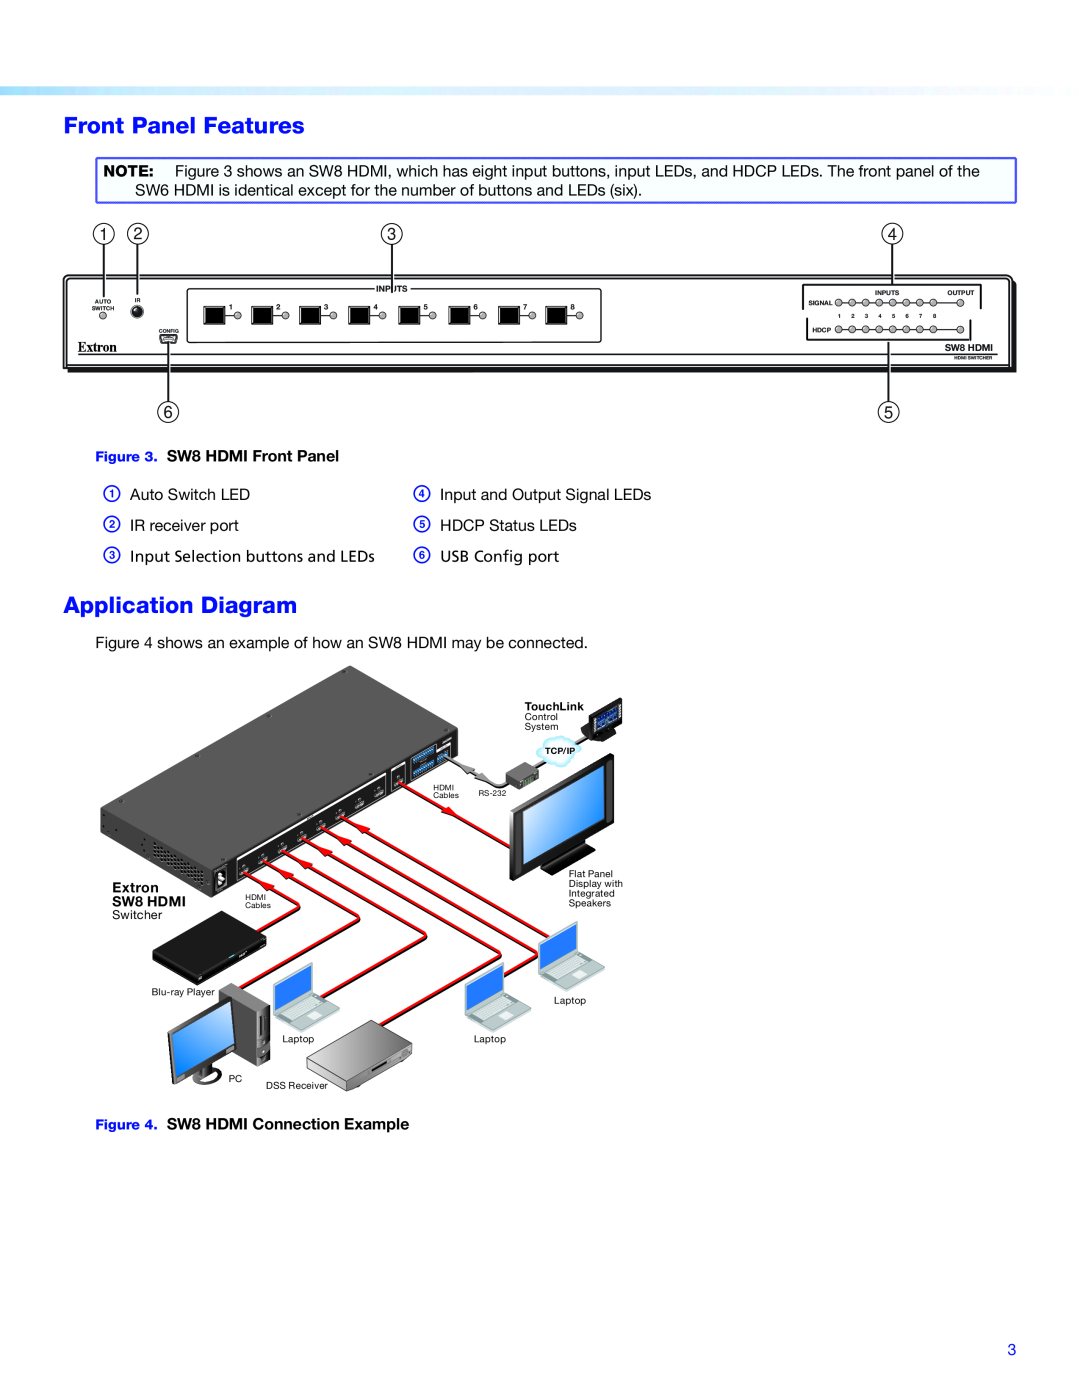 Extron electronic Front Panel Features, Application Diagram, A Auto Switch LED, B IR receiver port, Extron SW8 HDMI 